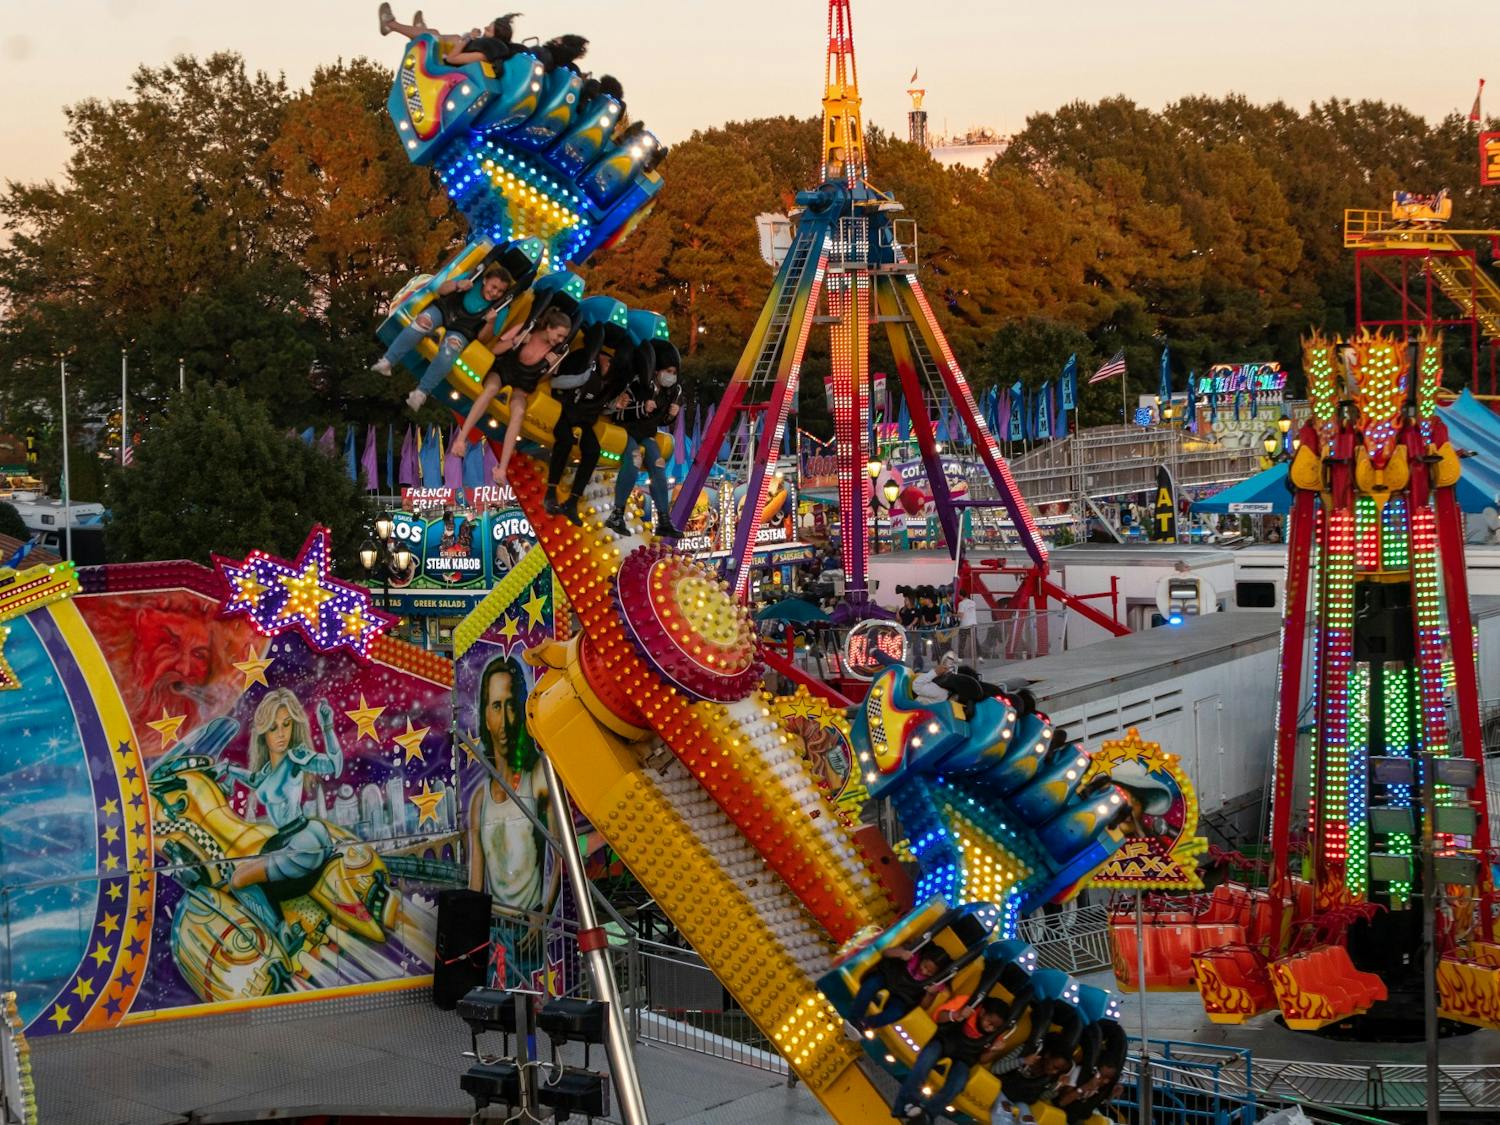 Attractions at the North Carolina State Fair in Raleigh pictured on Friday, Oct. 14, 2022.